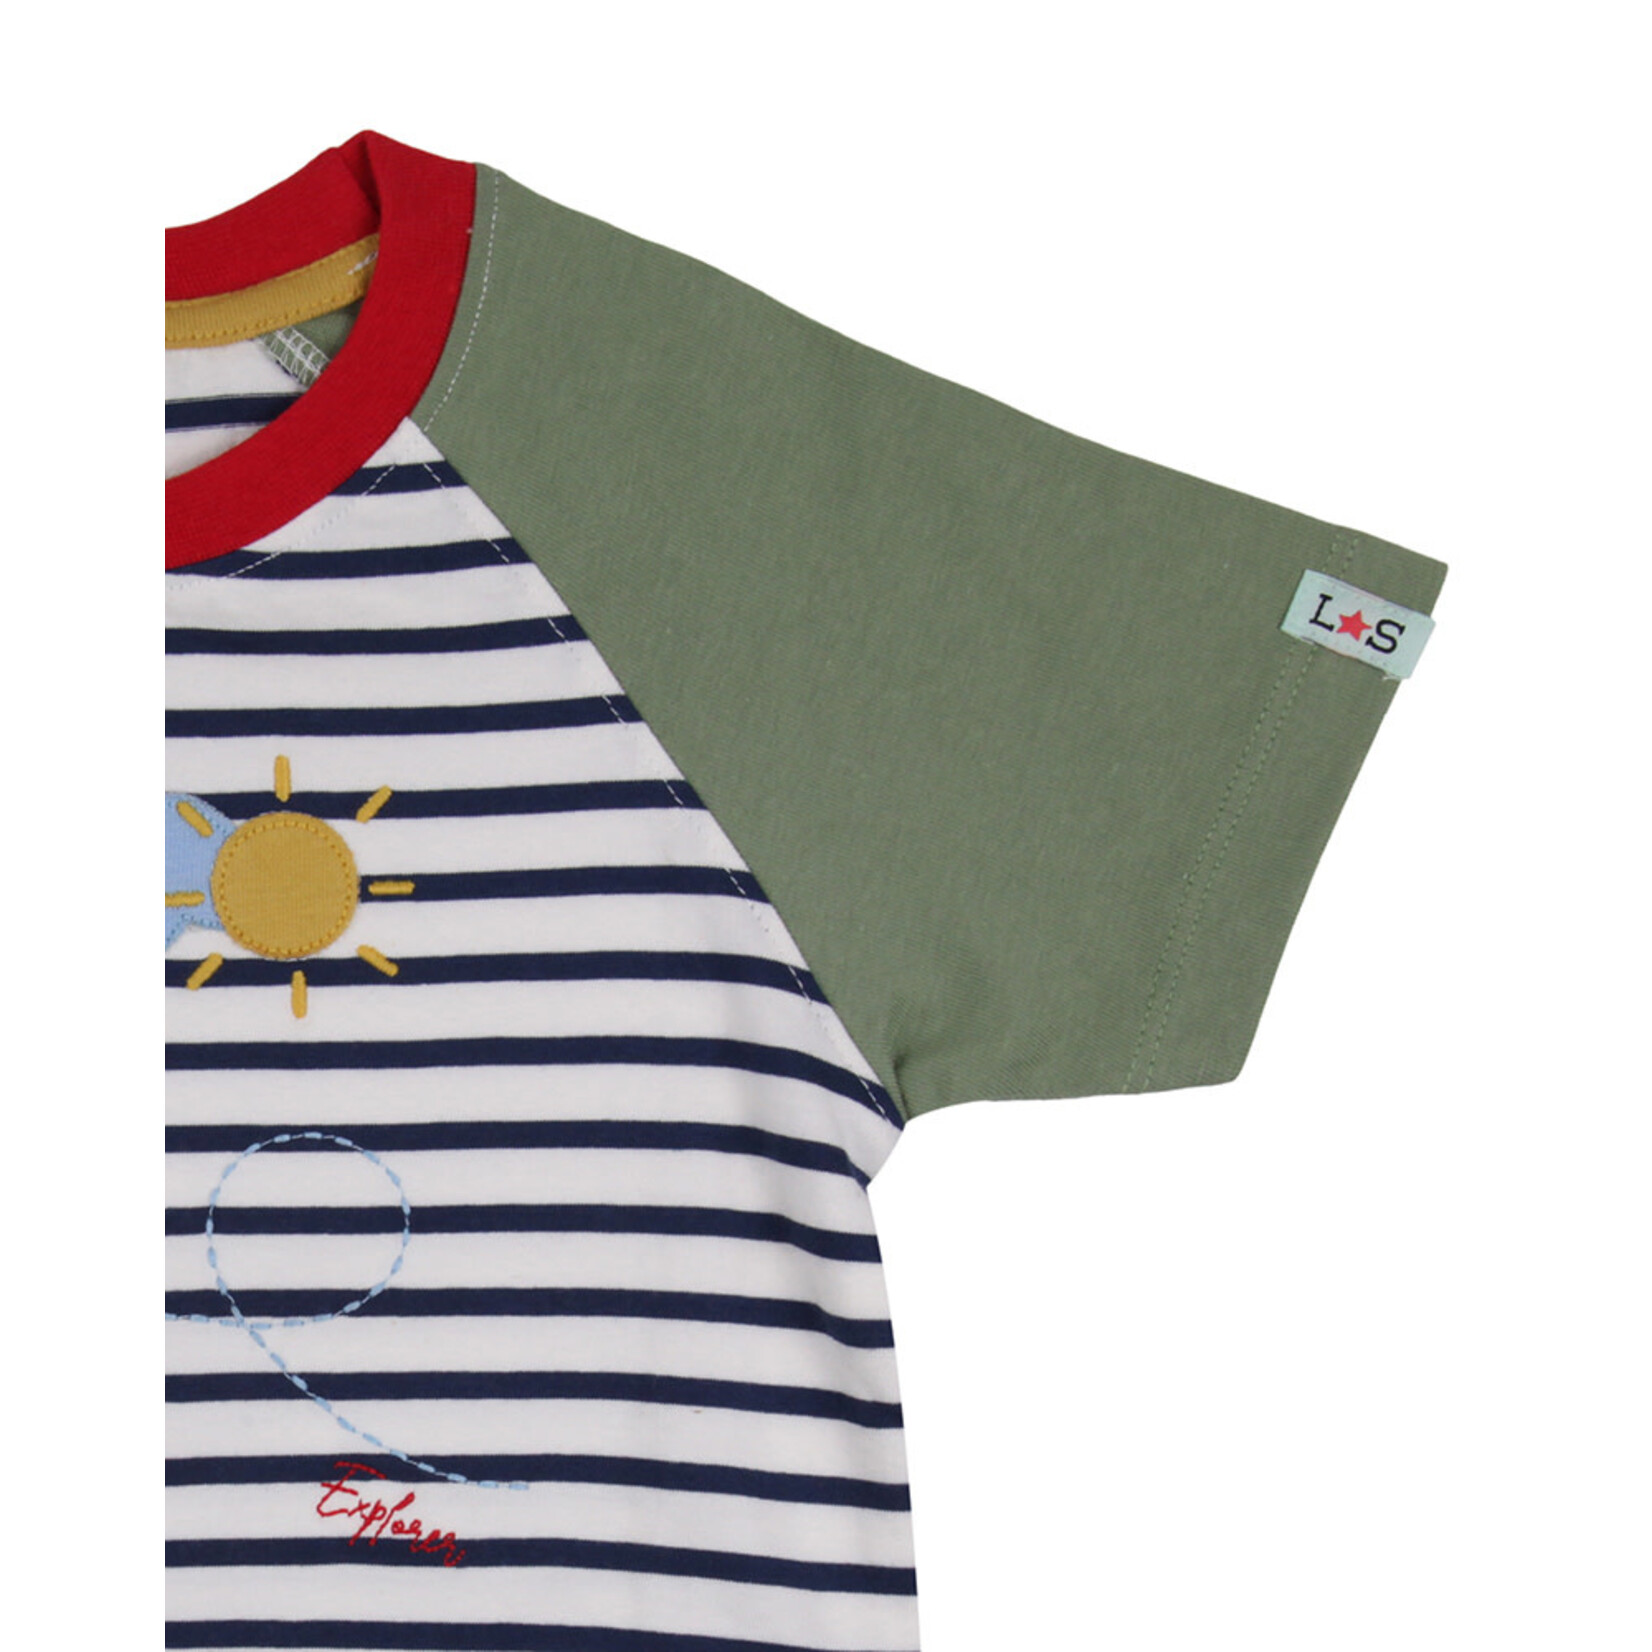 Lilly+Sid LILLY+SID - Short Sleeve Striped T-Shirt with Teddy Bear on a Plane Appliqué